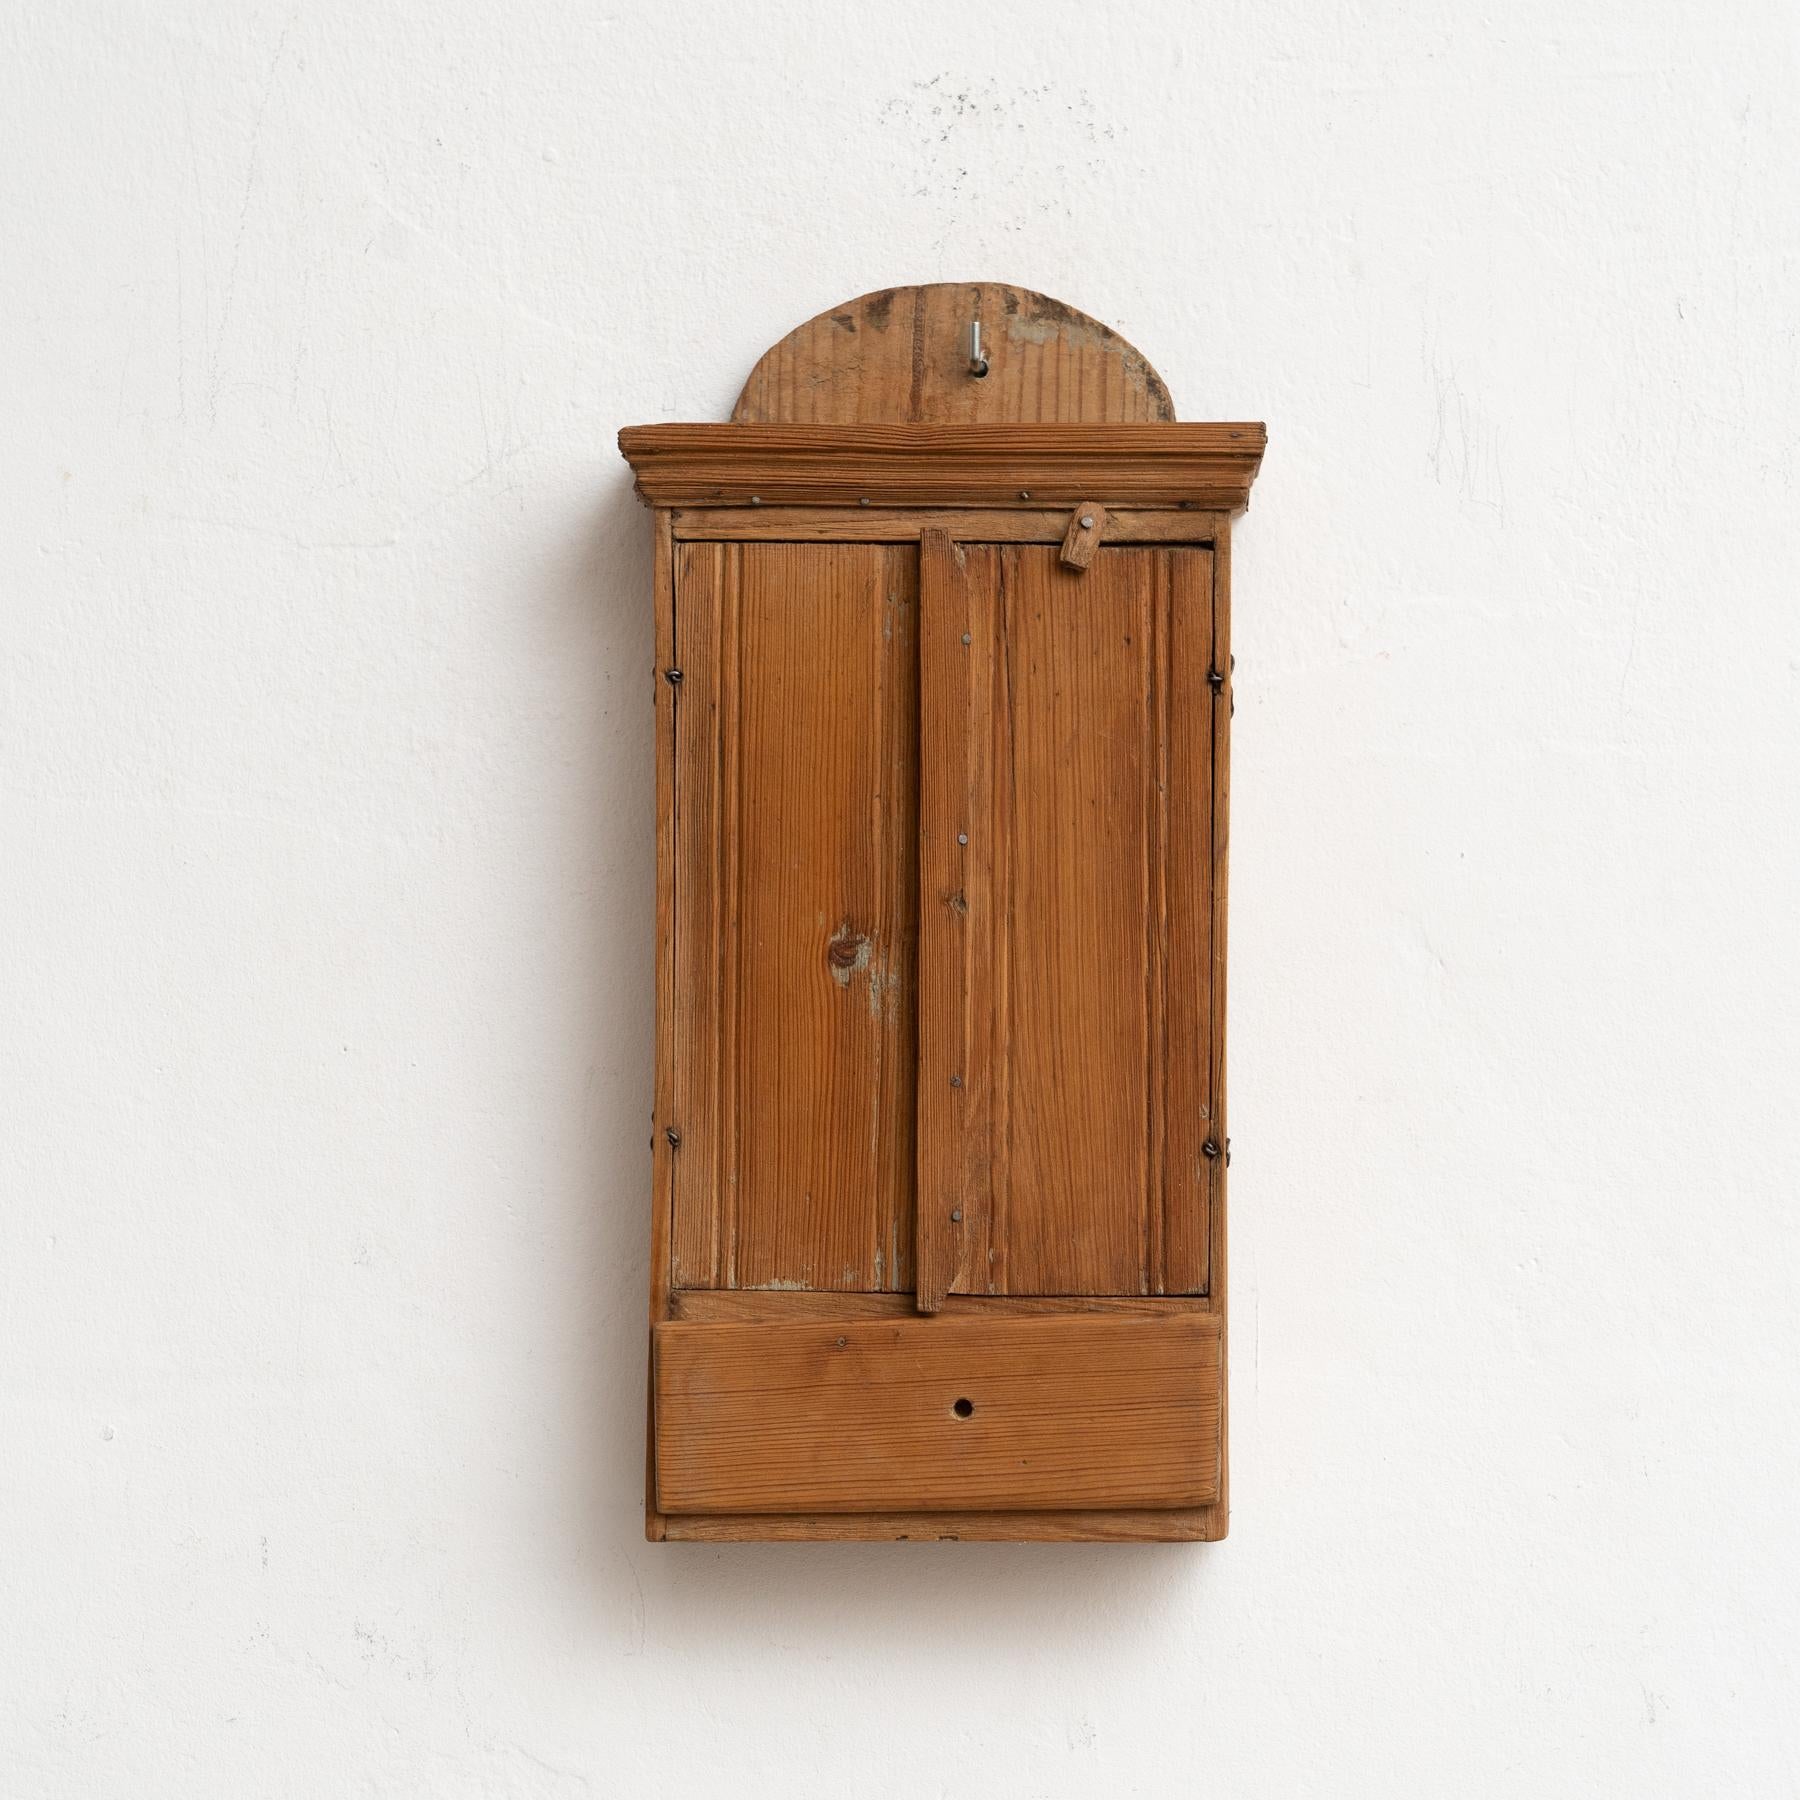 Early 20th Century Rustic Wood Small Wall Cabinet

By unknown manufacturer from France

In original condition, with minor wear consistent of age and use, preserving a beautiful patina.